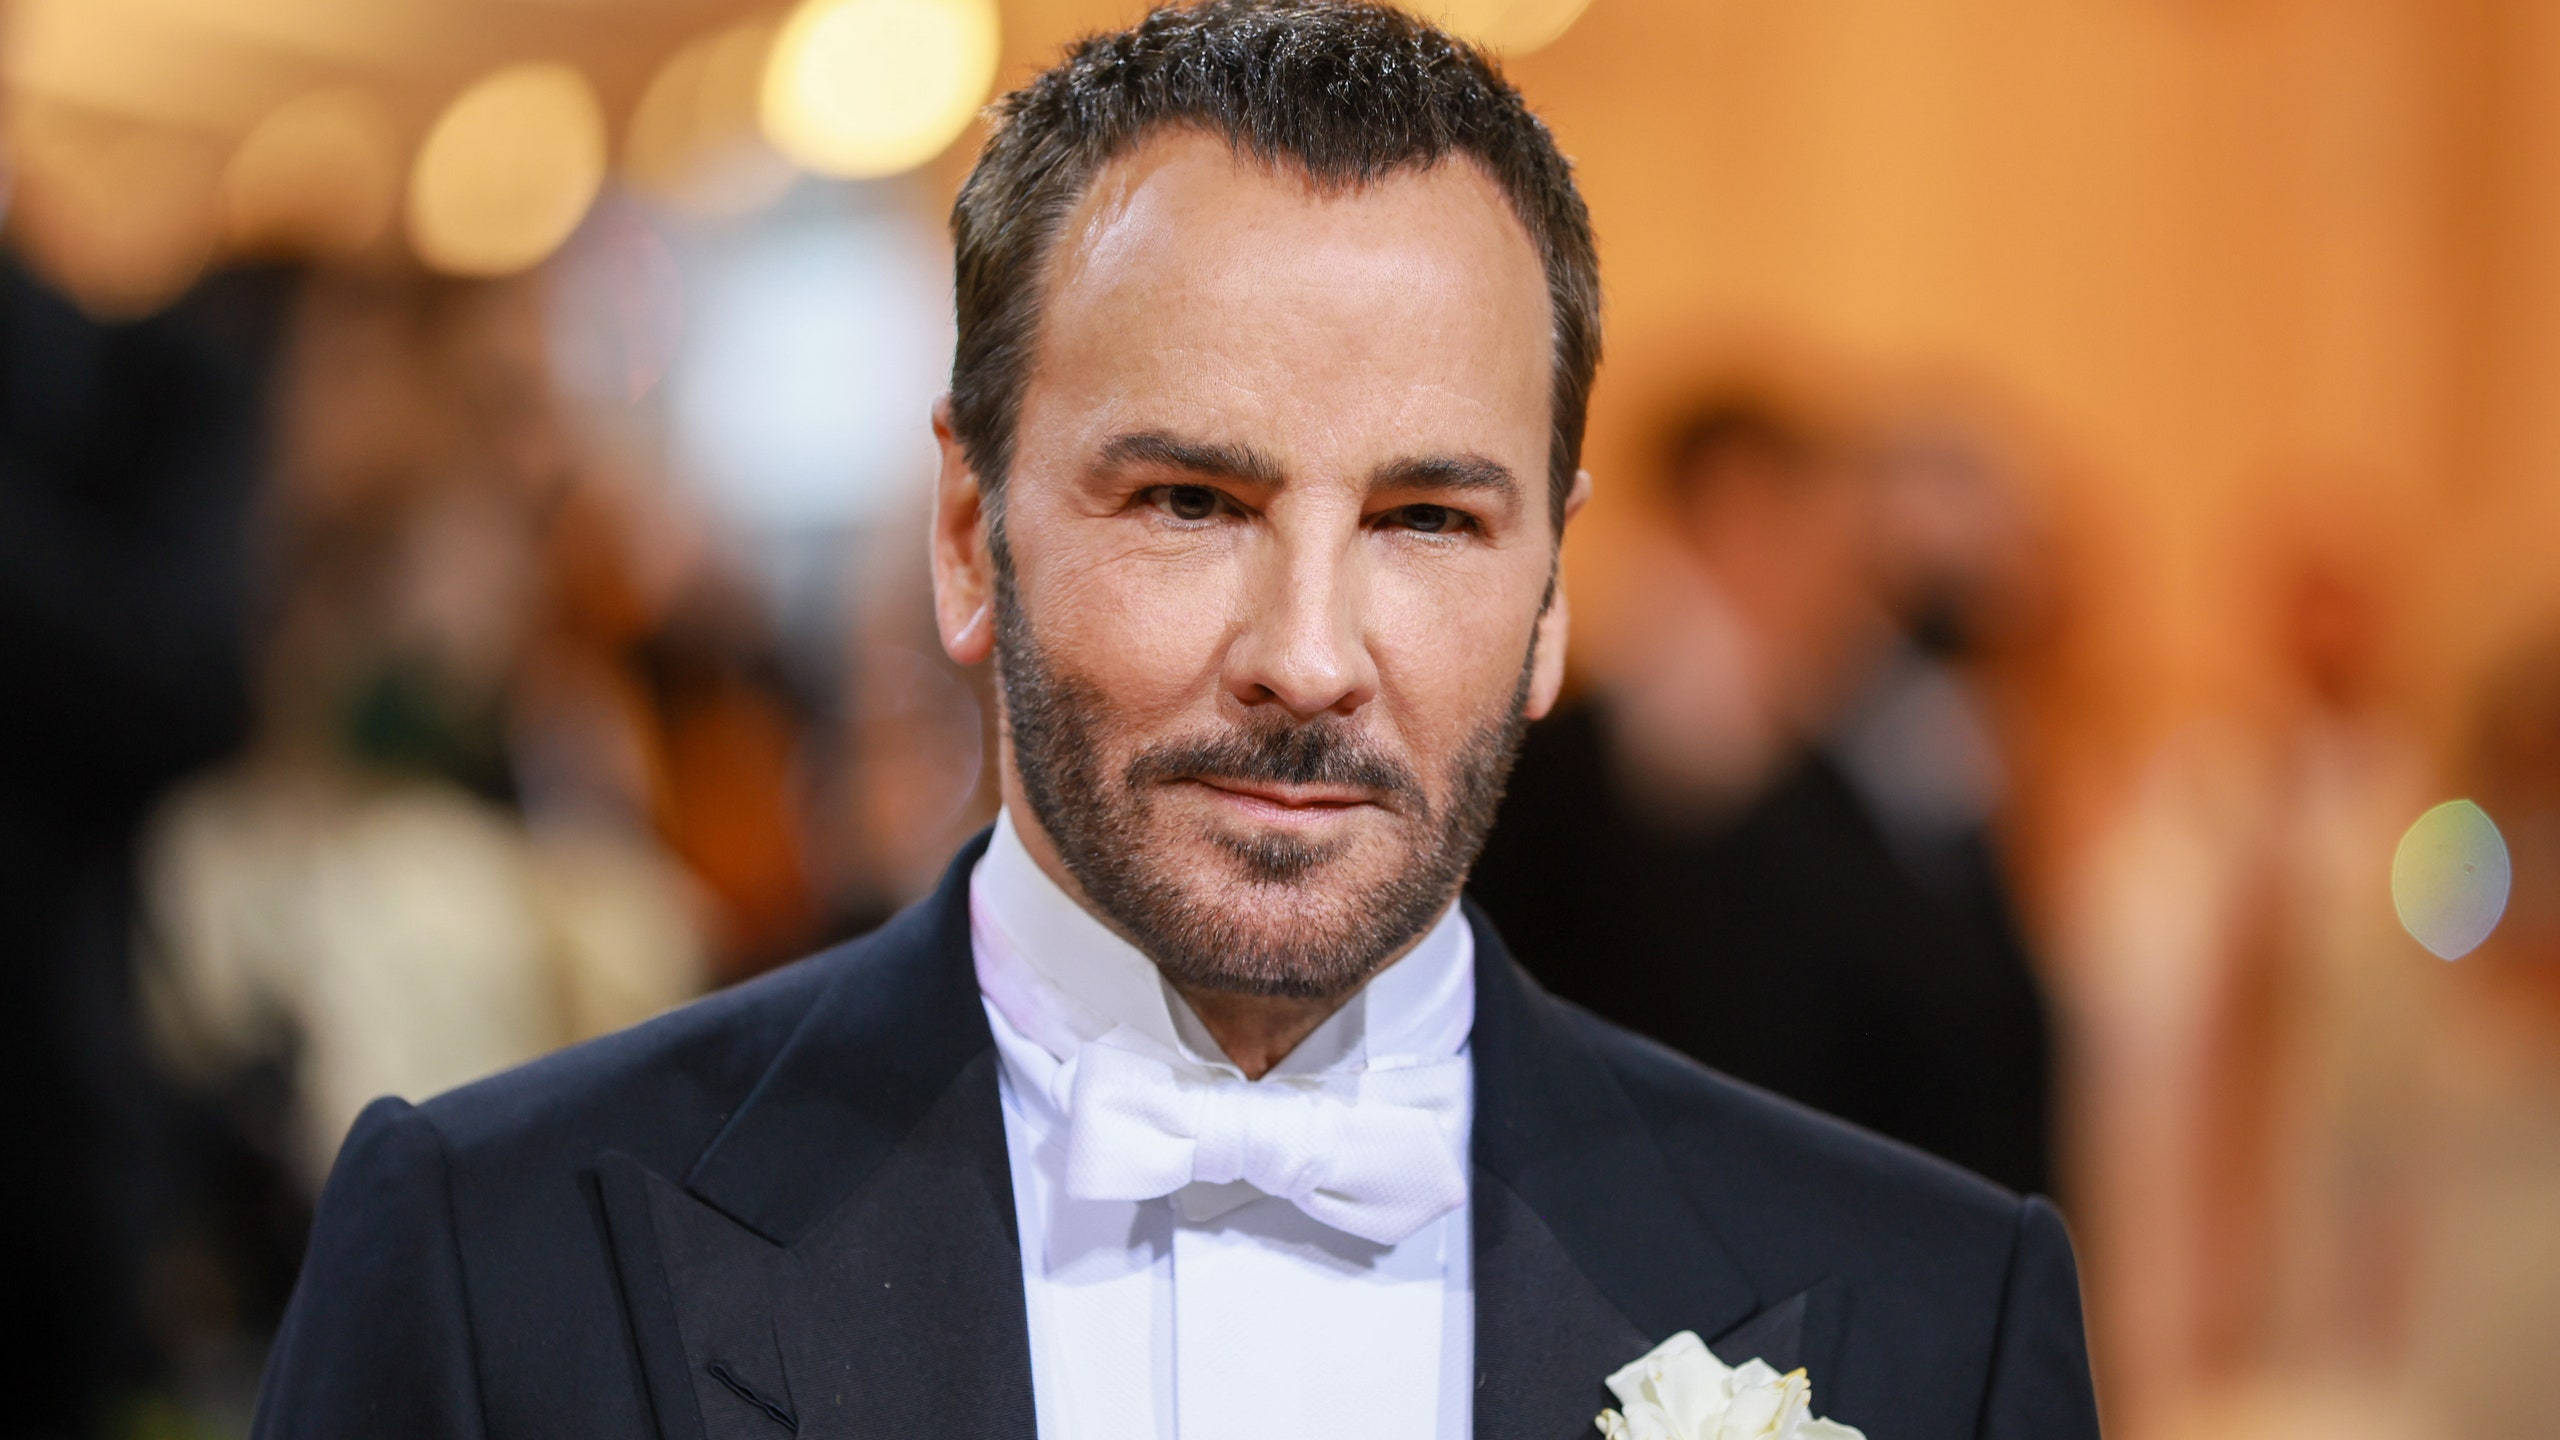 Download Tom Ford With White Bowtie Wallpaper | Wallpapers.com